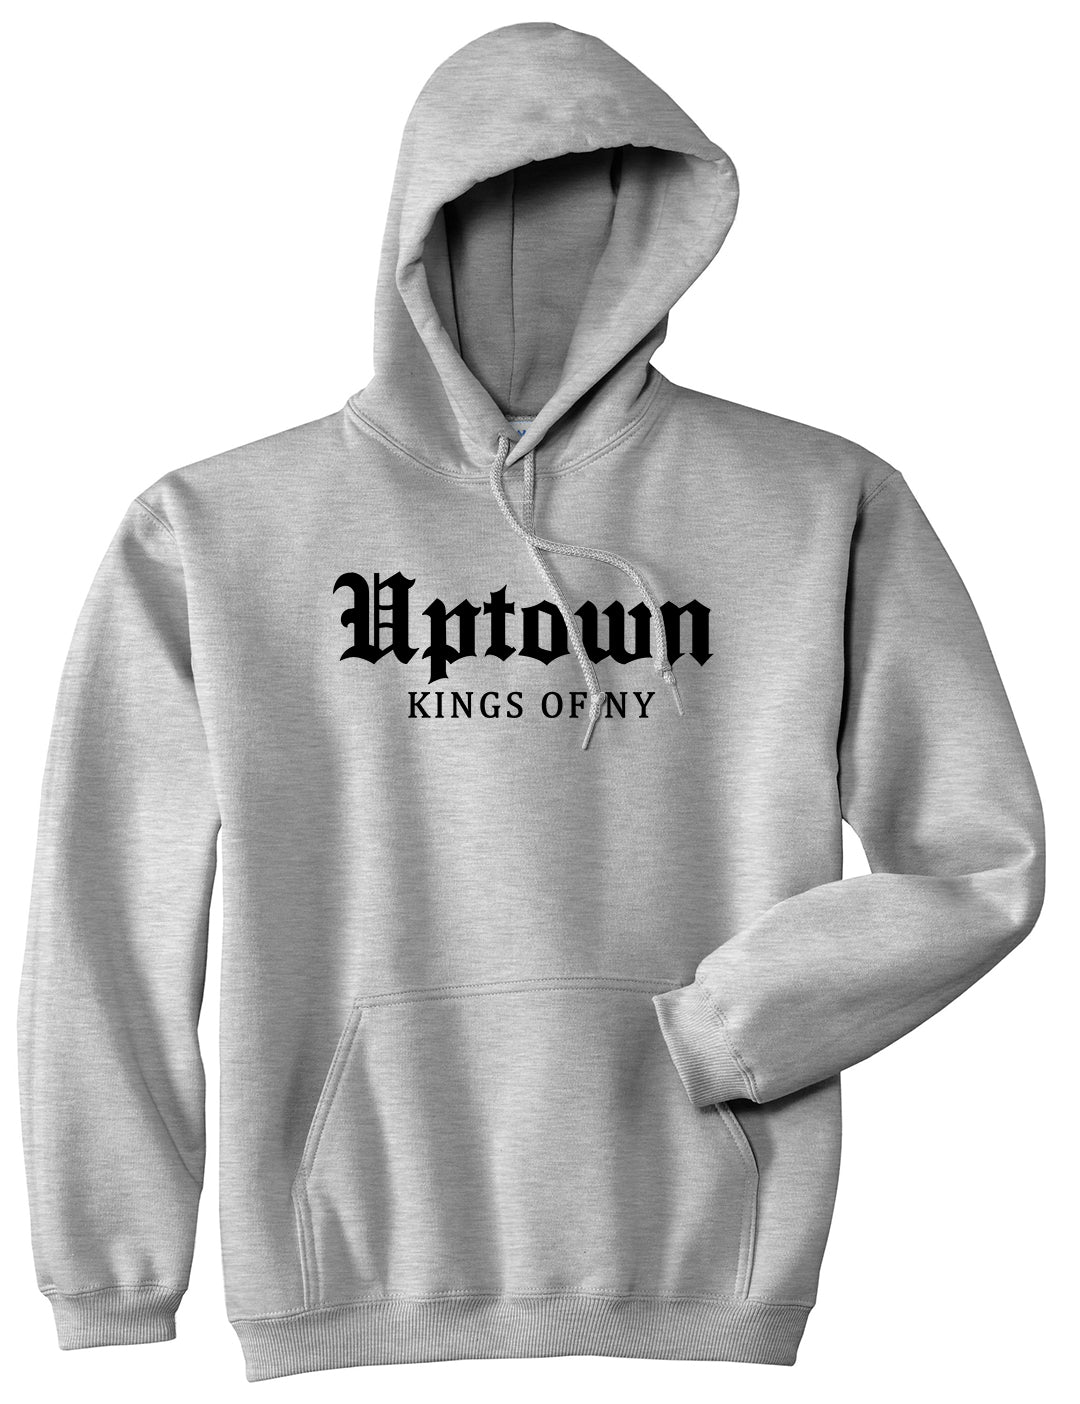 Uptown Old English Mens Pullover Hoodie Grey by Kings Of NY